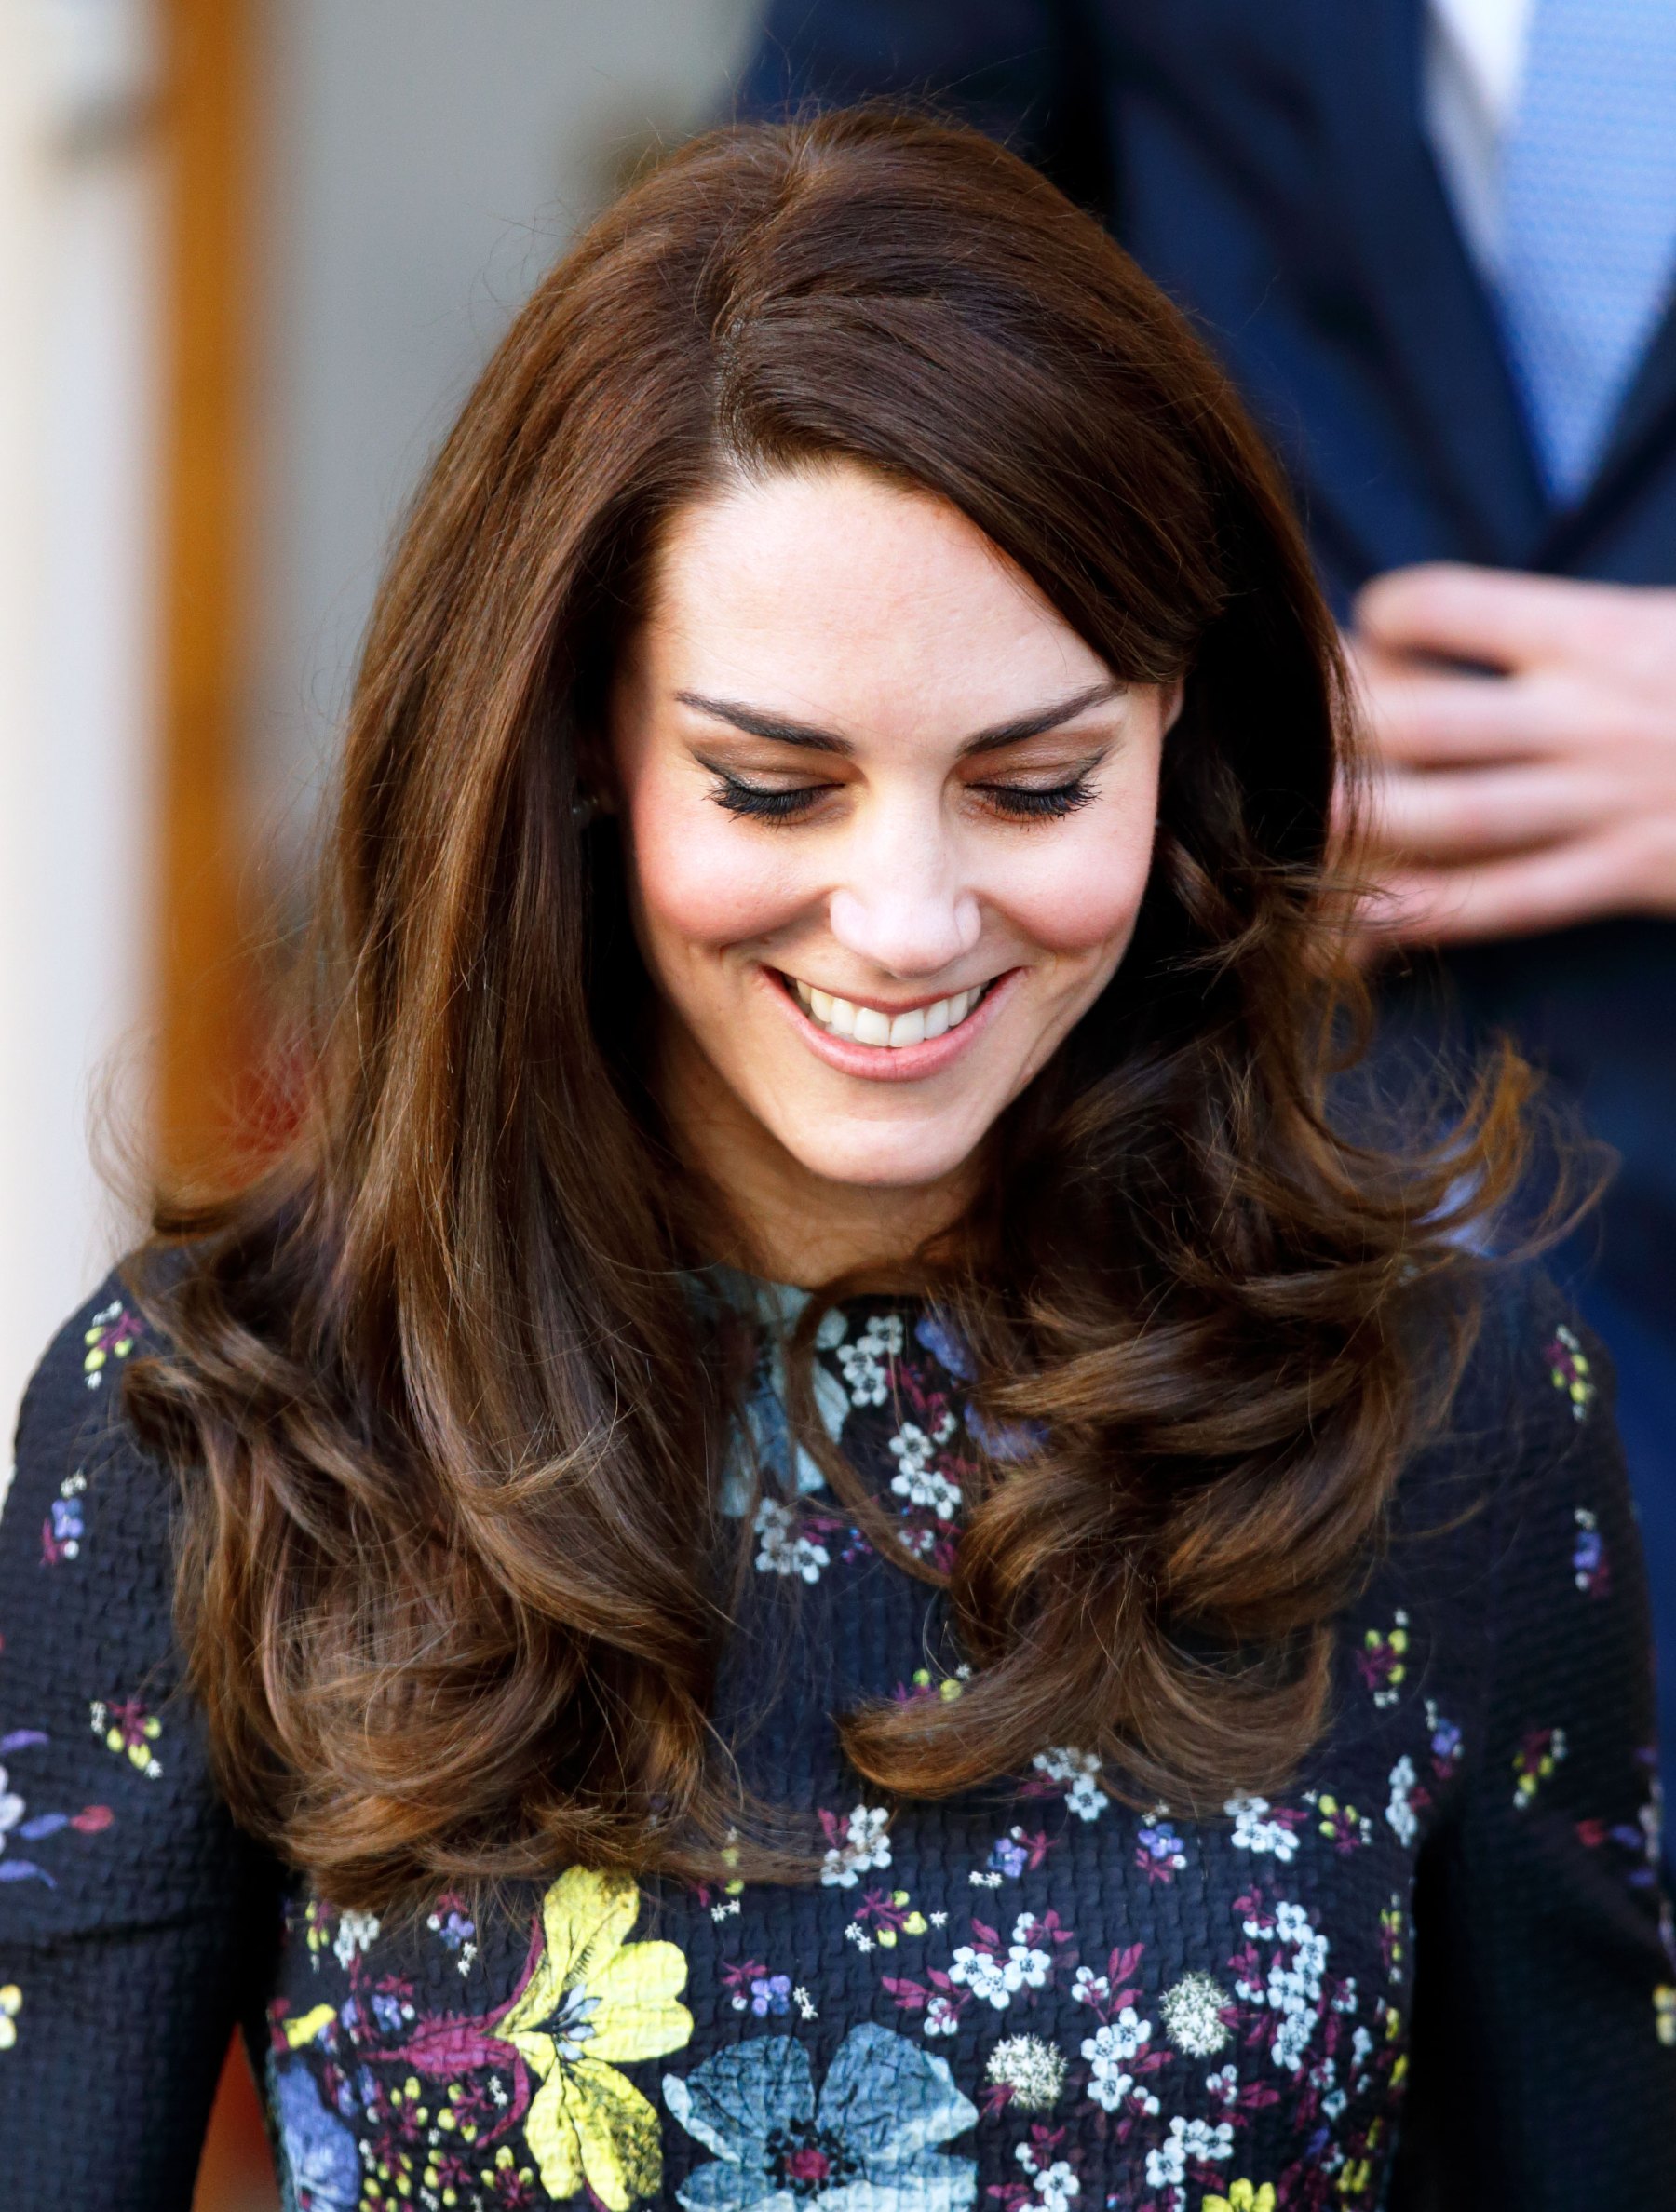 Duchess Kate Wears Floral Dress for Heads Together Event